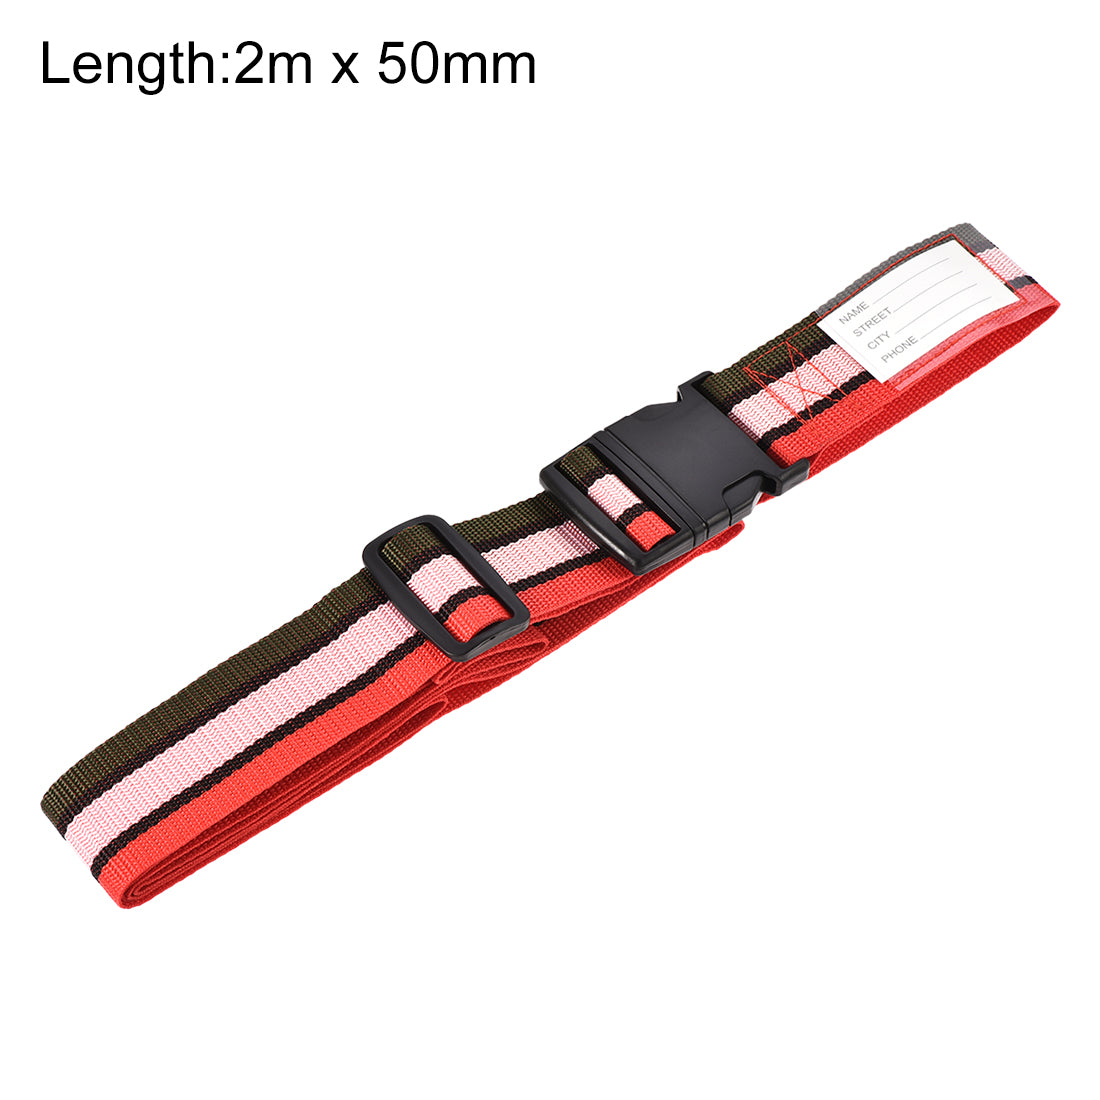 uxcell Uxcell Luggage Straps Suitcase Belts with Buckle Label, 2Mx5cm Adjustable PP Travel Bag Packing Accessories, Multi Color (Red Pink Dark Green) 4Pcs